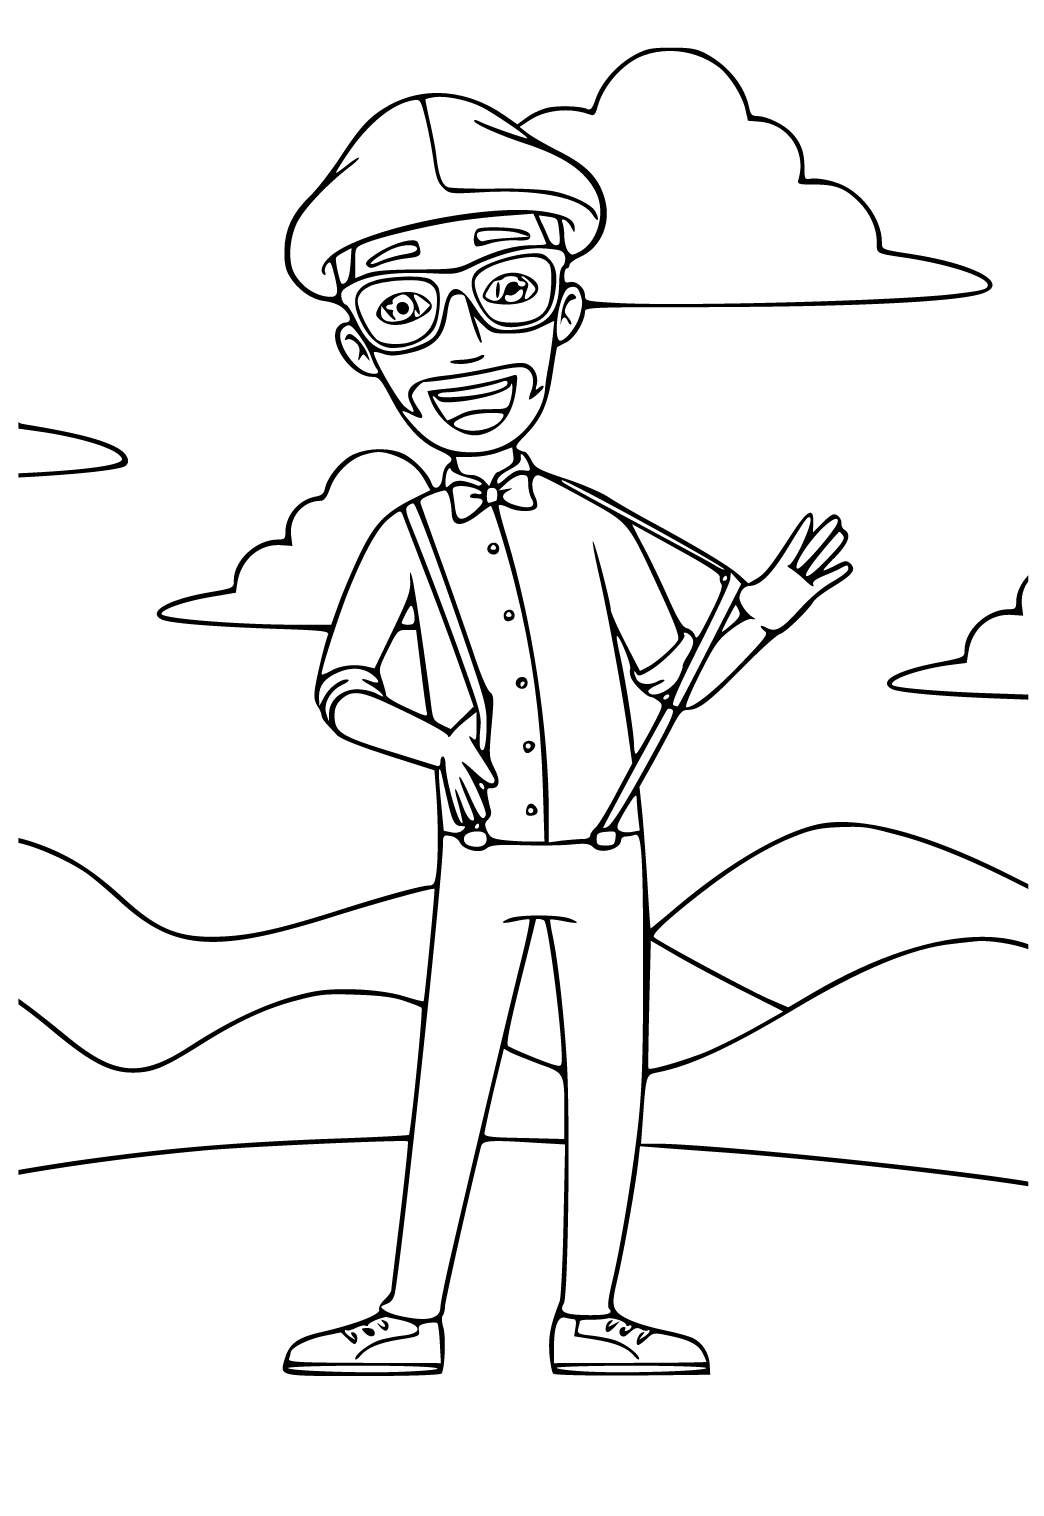 Free printable blippi suspender coloring page for adults and kids